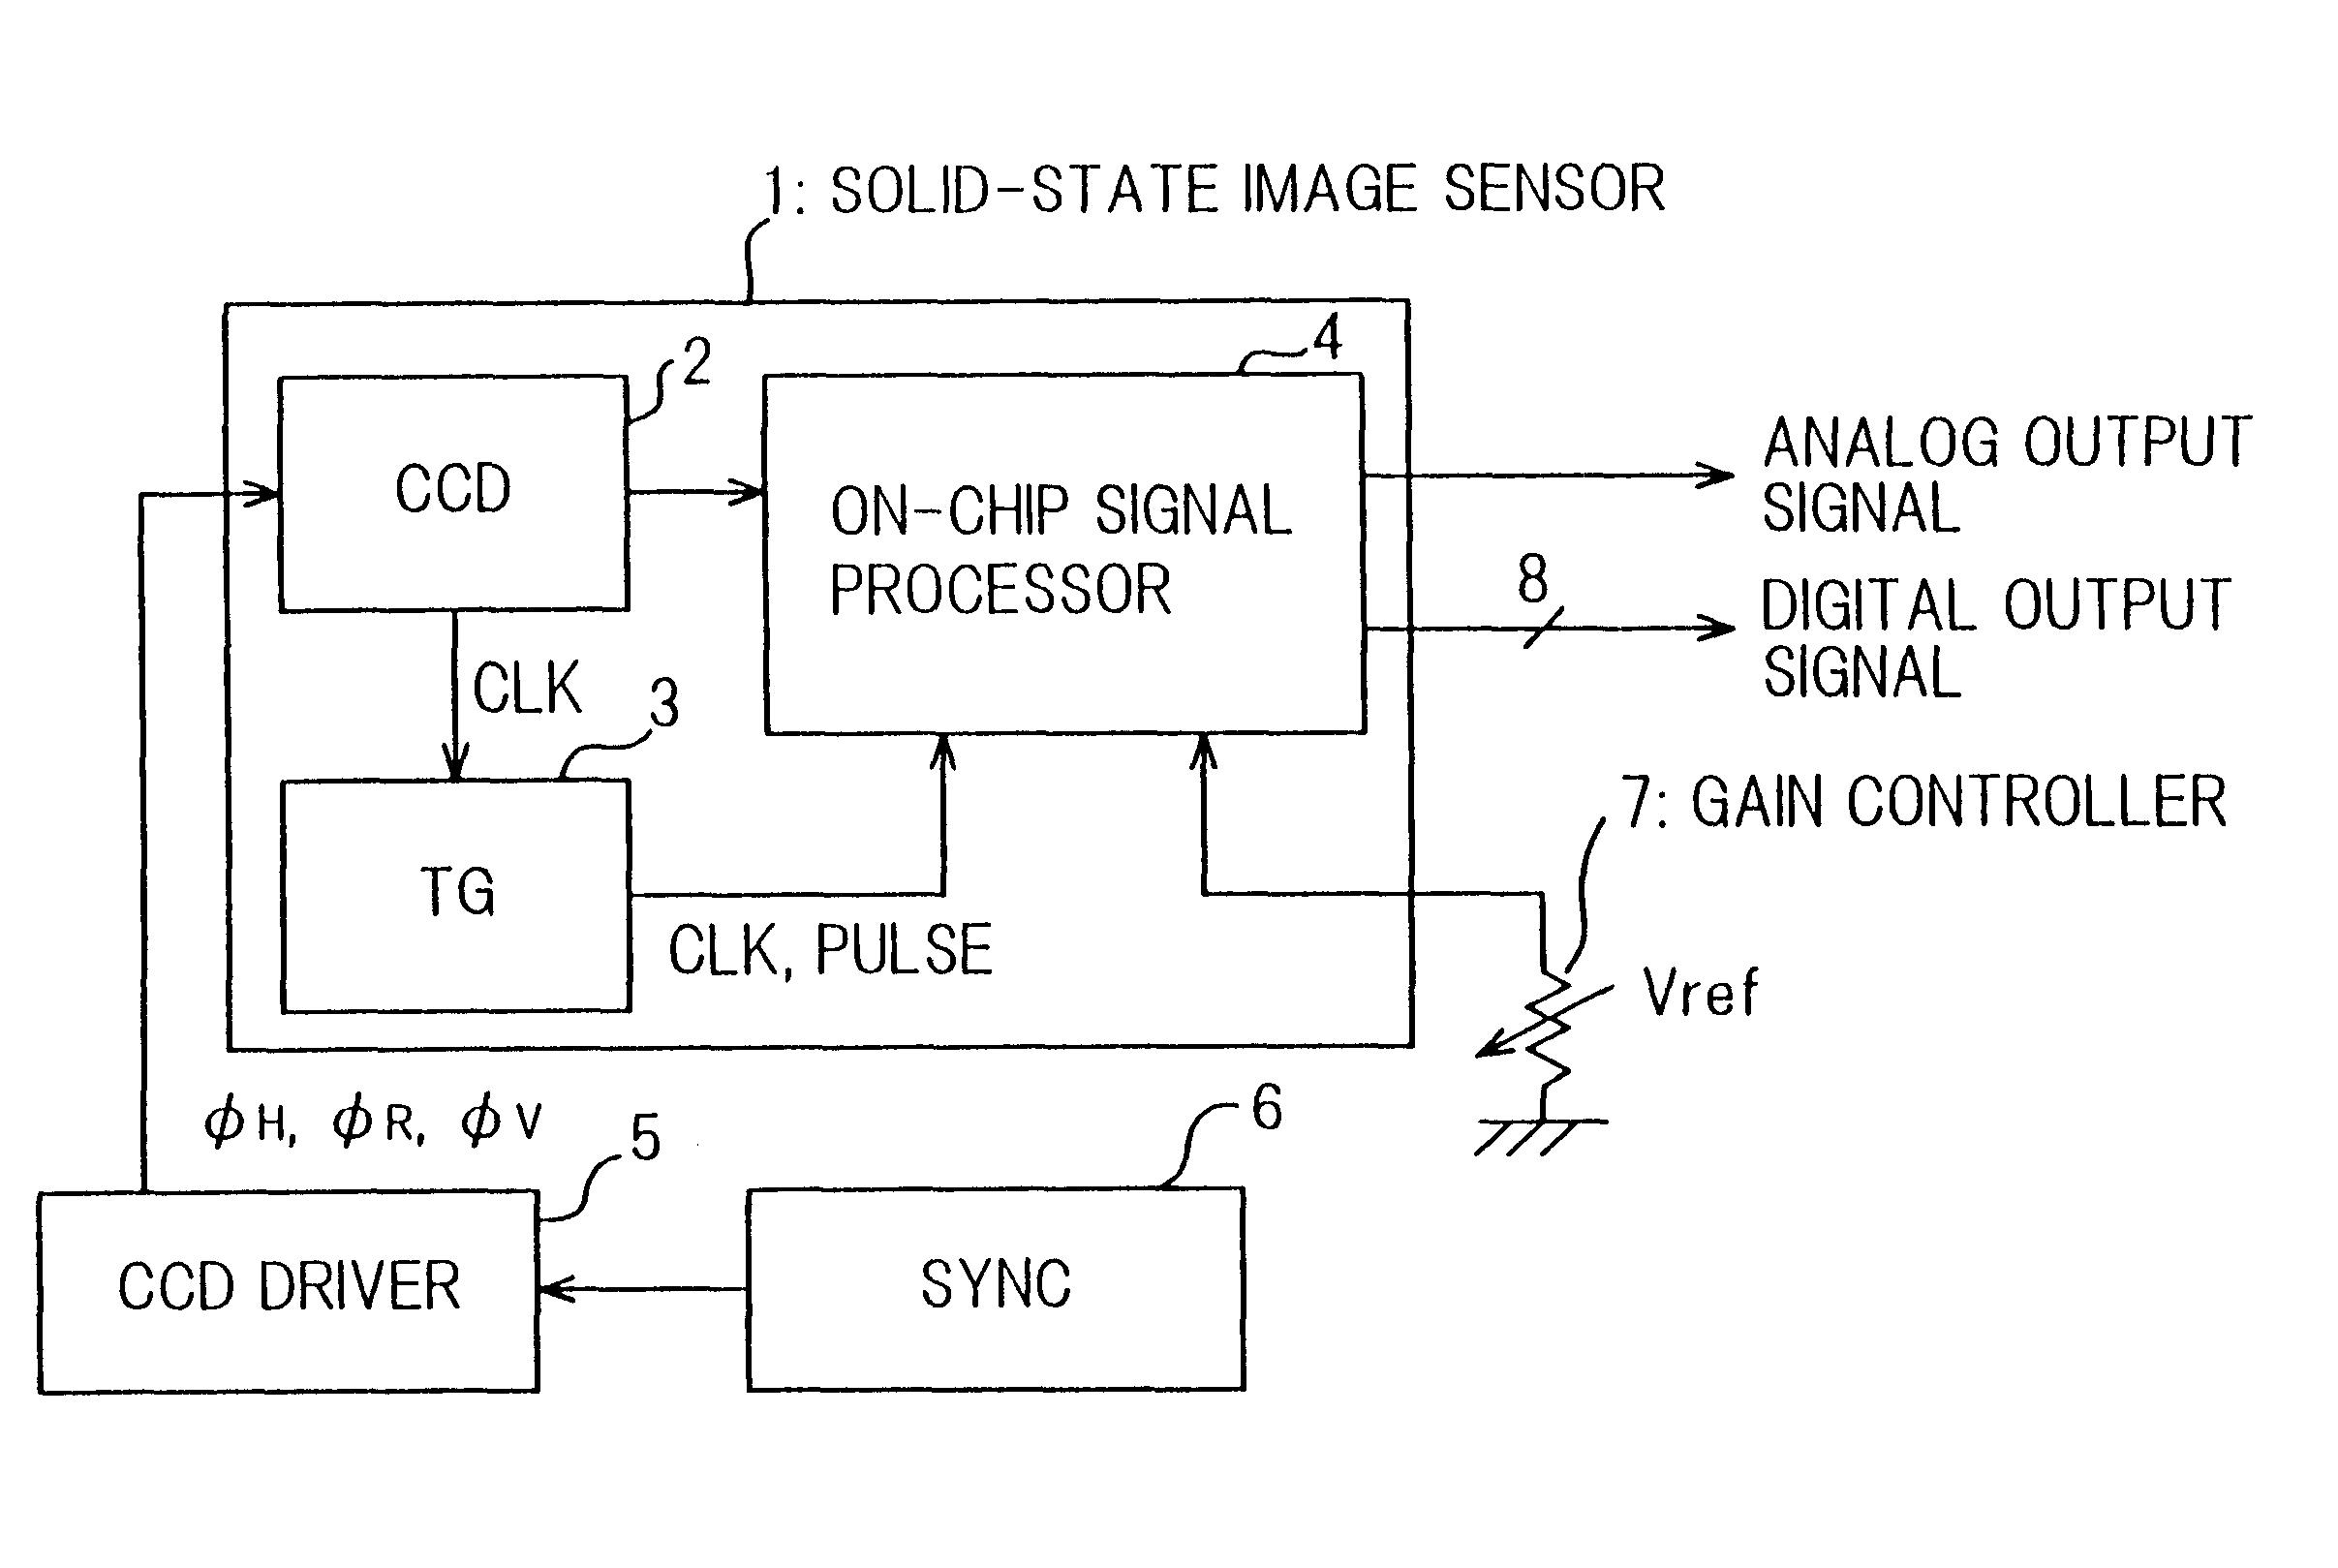 Solid-state camera including a charge coupled device